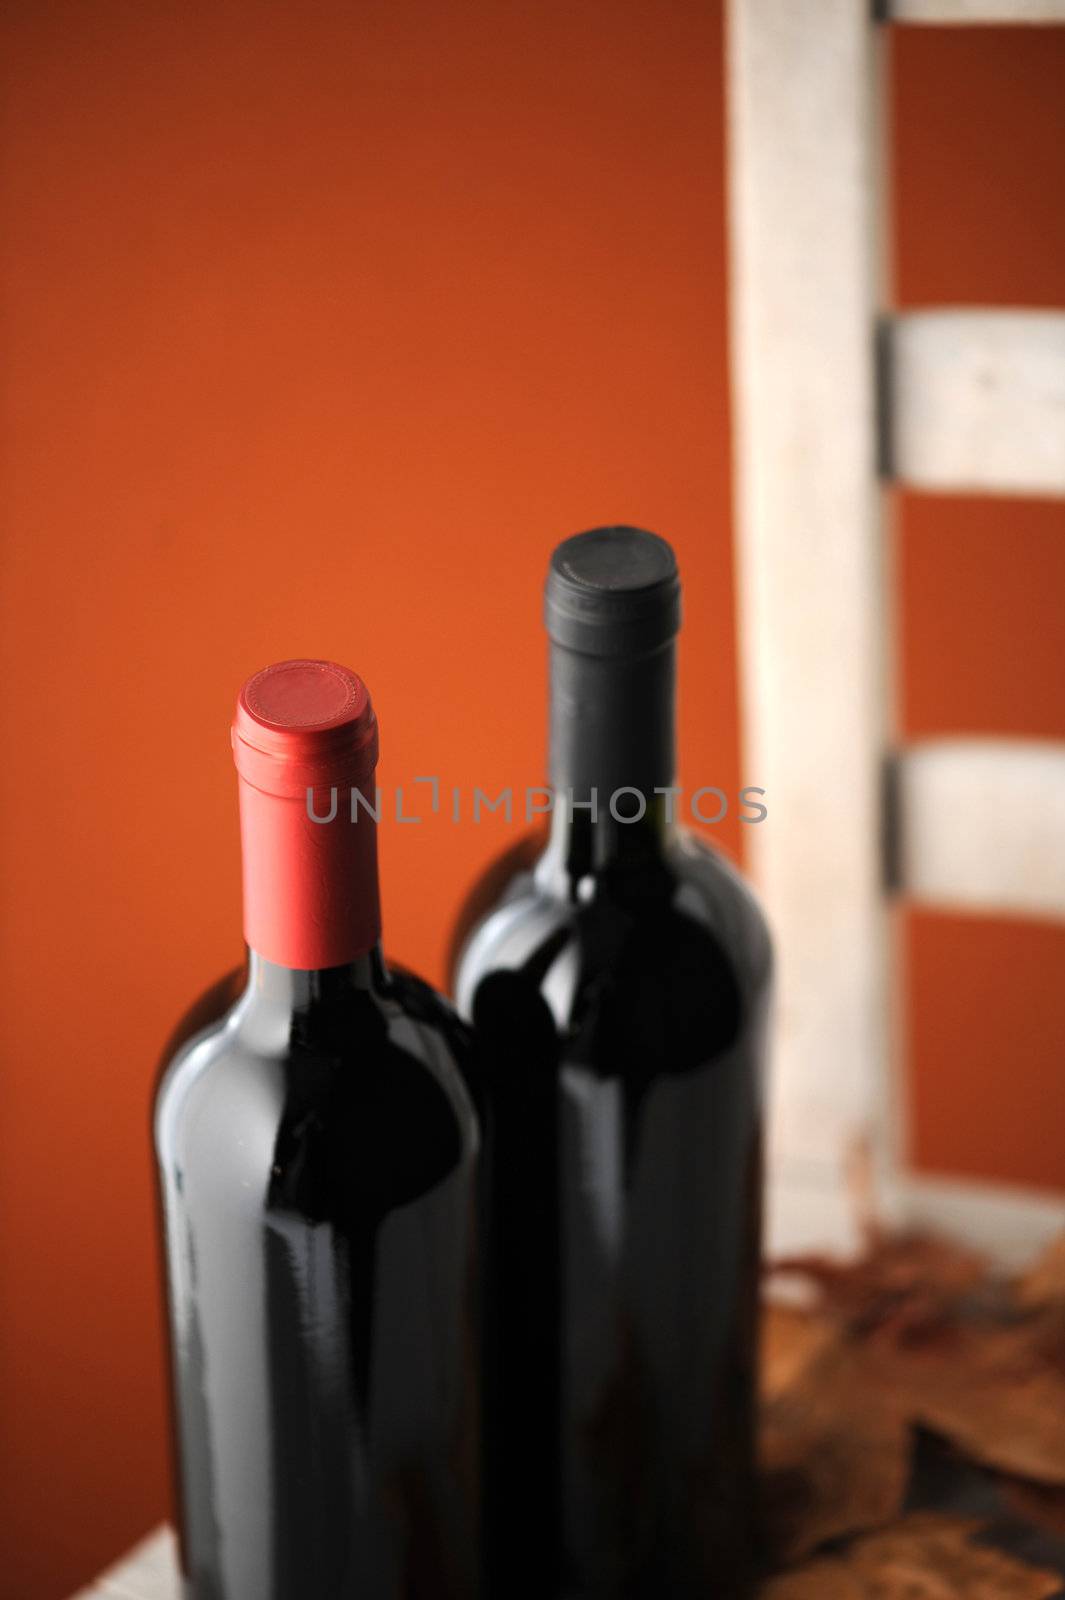  bottles of red wine on a white wooden chair (shallow dof)